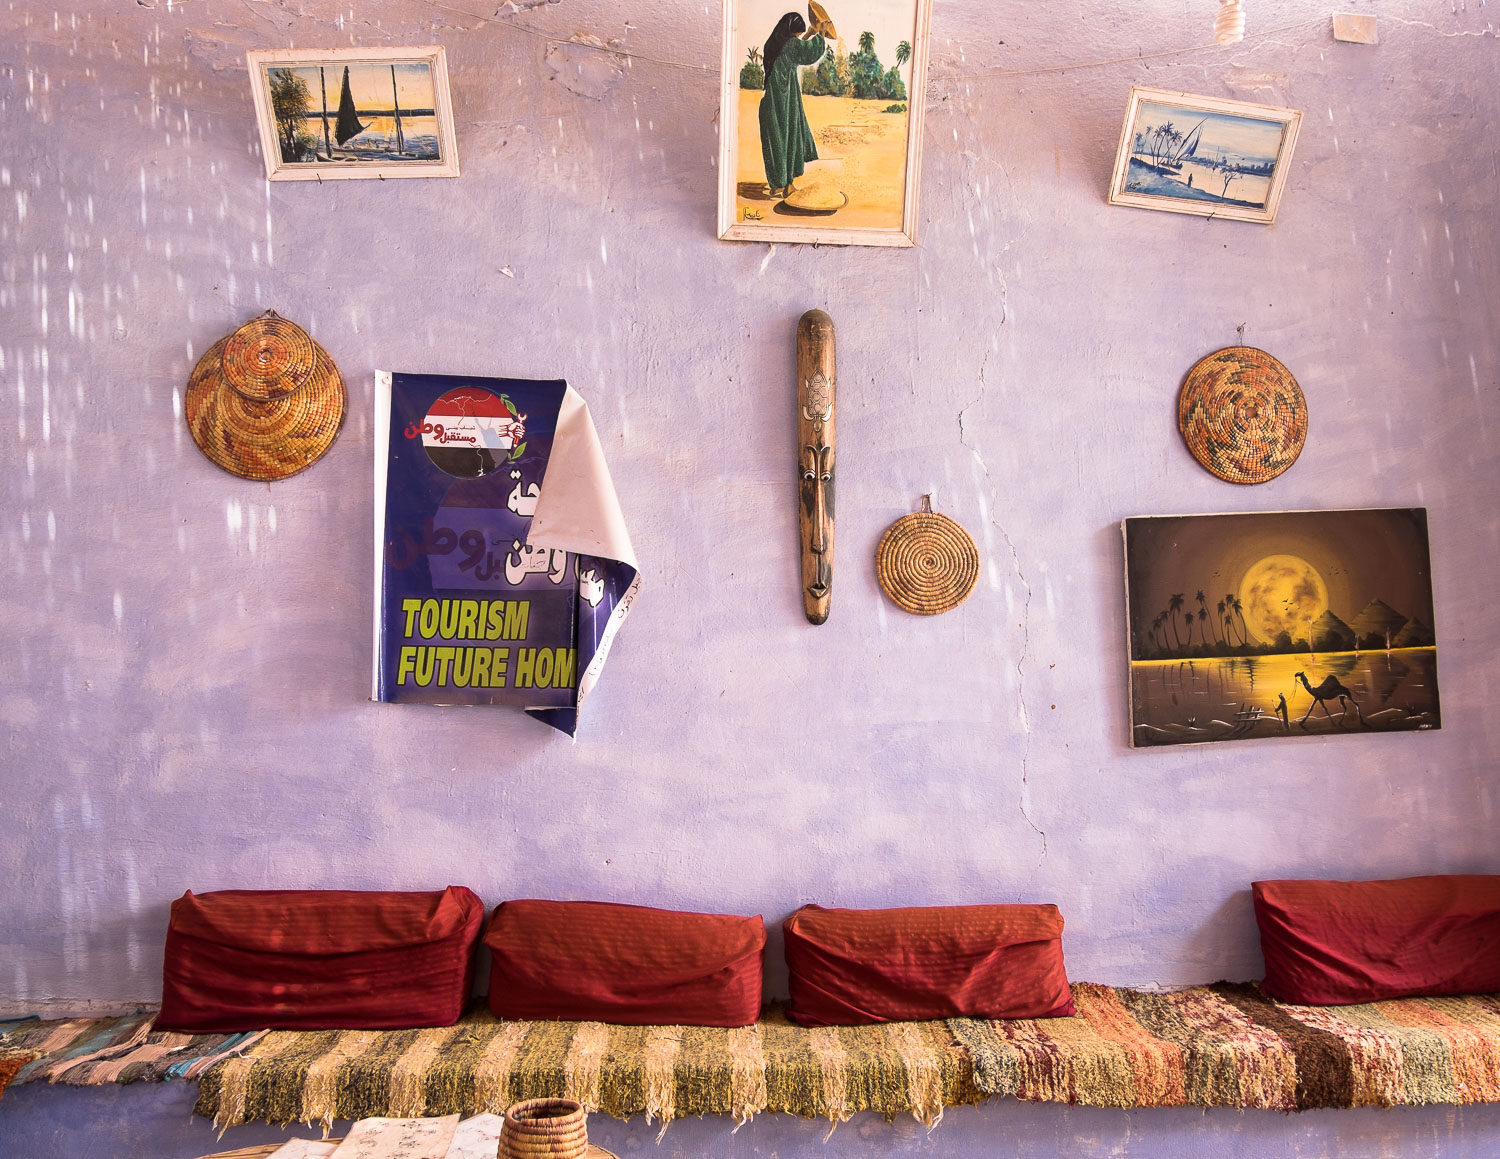 Tourism-related posters in a cafe in the Nubian village of Western Suheil (photo: Maya Hautefeuille)